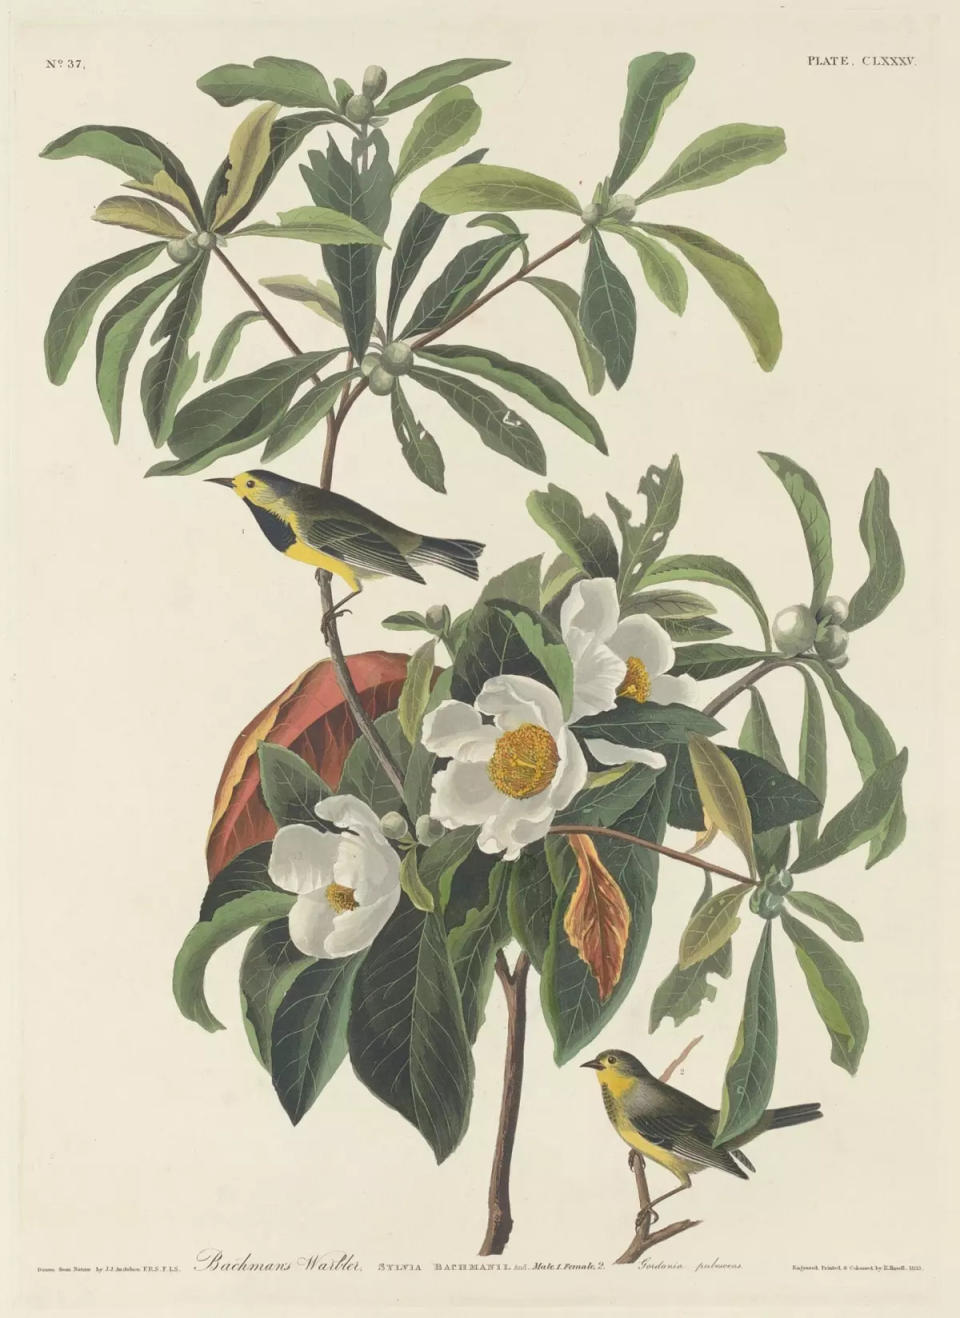 The Bachman's warbler once was found across Alabama, Florida, Georgia, the Carolinas and Tennessee, but the U.S. Fish and Wildlife Service will be taking it off the endangered species list because it's now considered extinct.